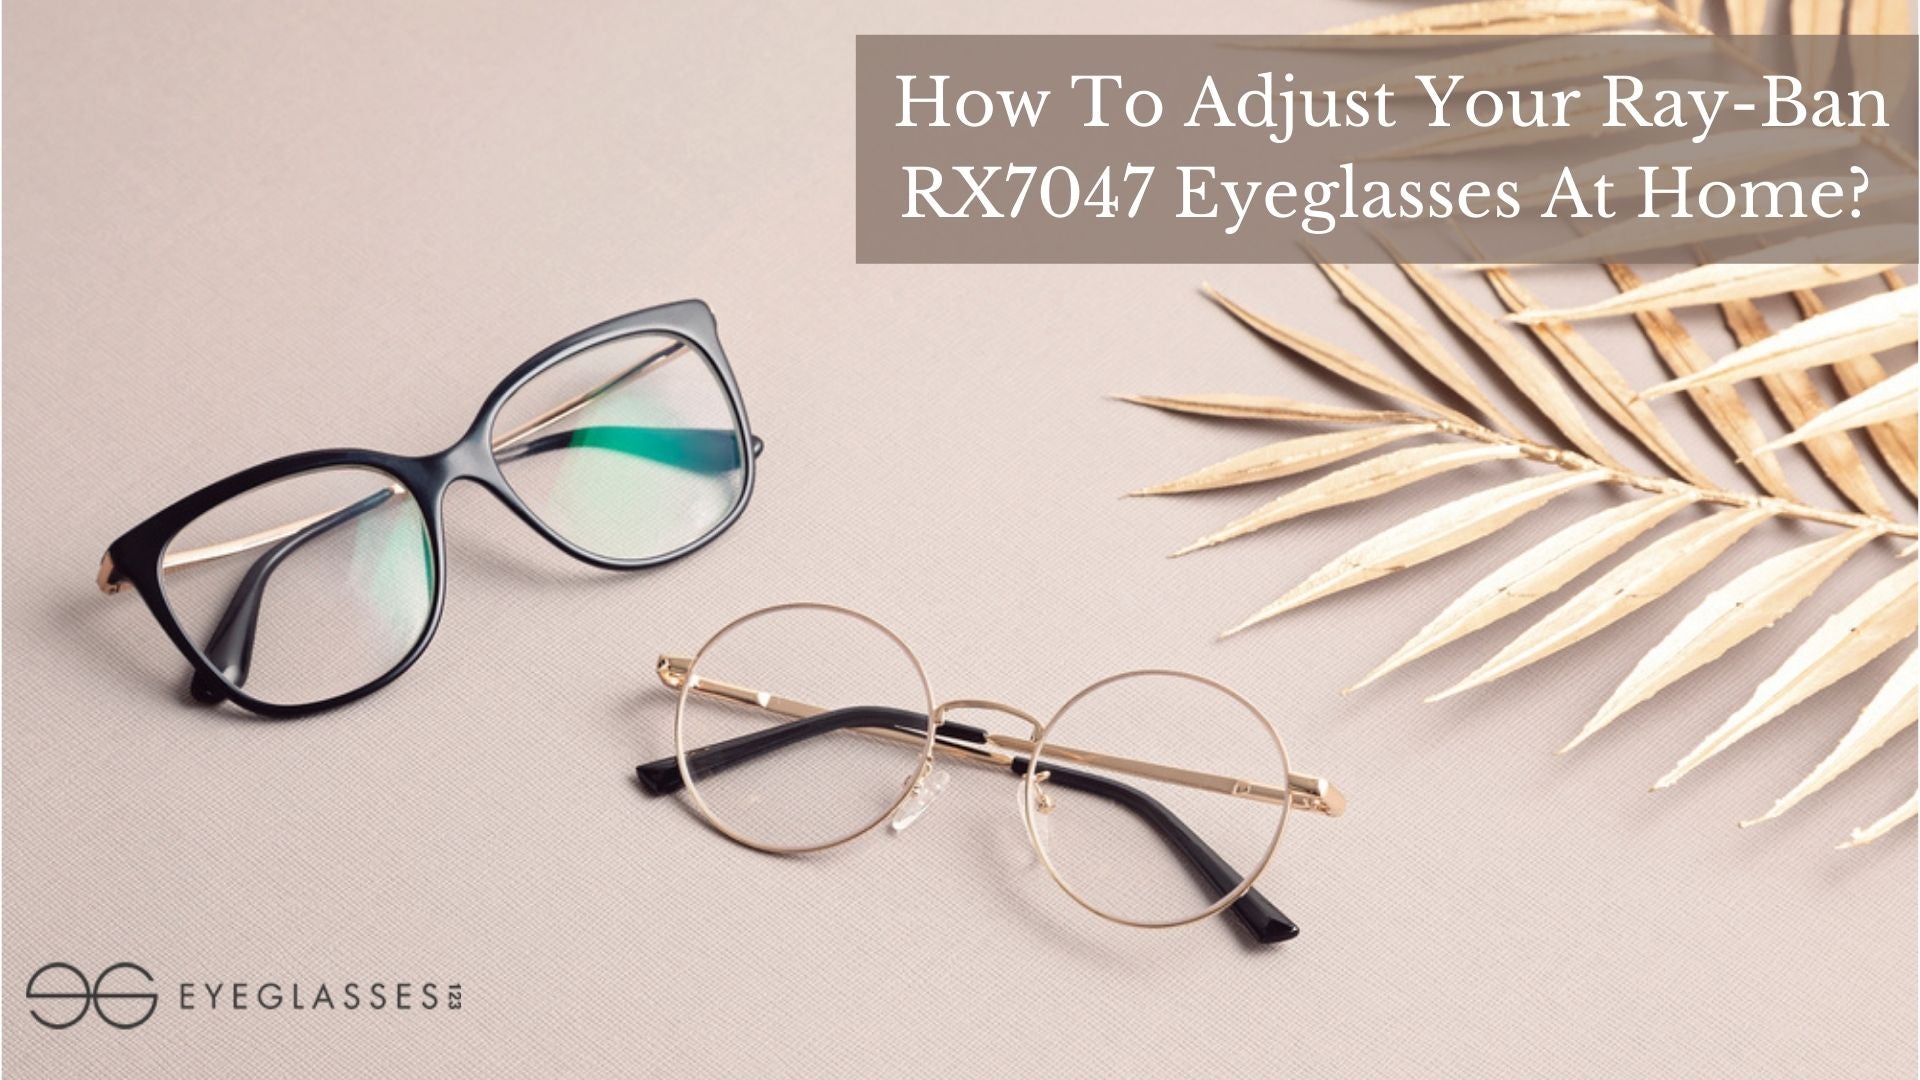 How To Adjust Your Ray-Ban RX7047 Eyeglasses At Home?